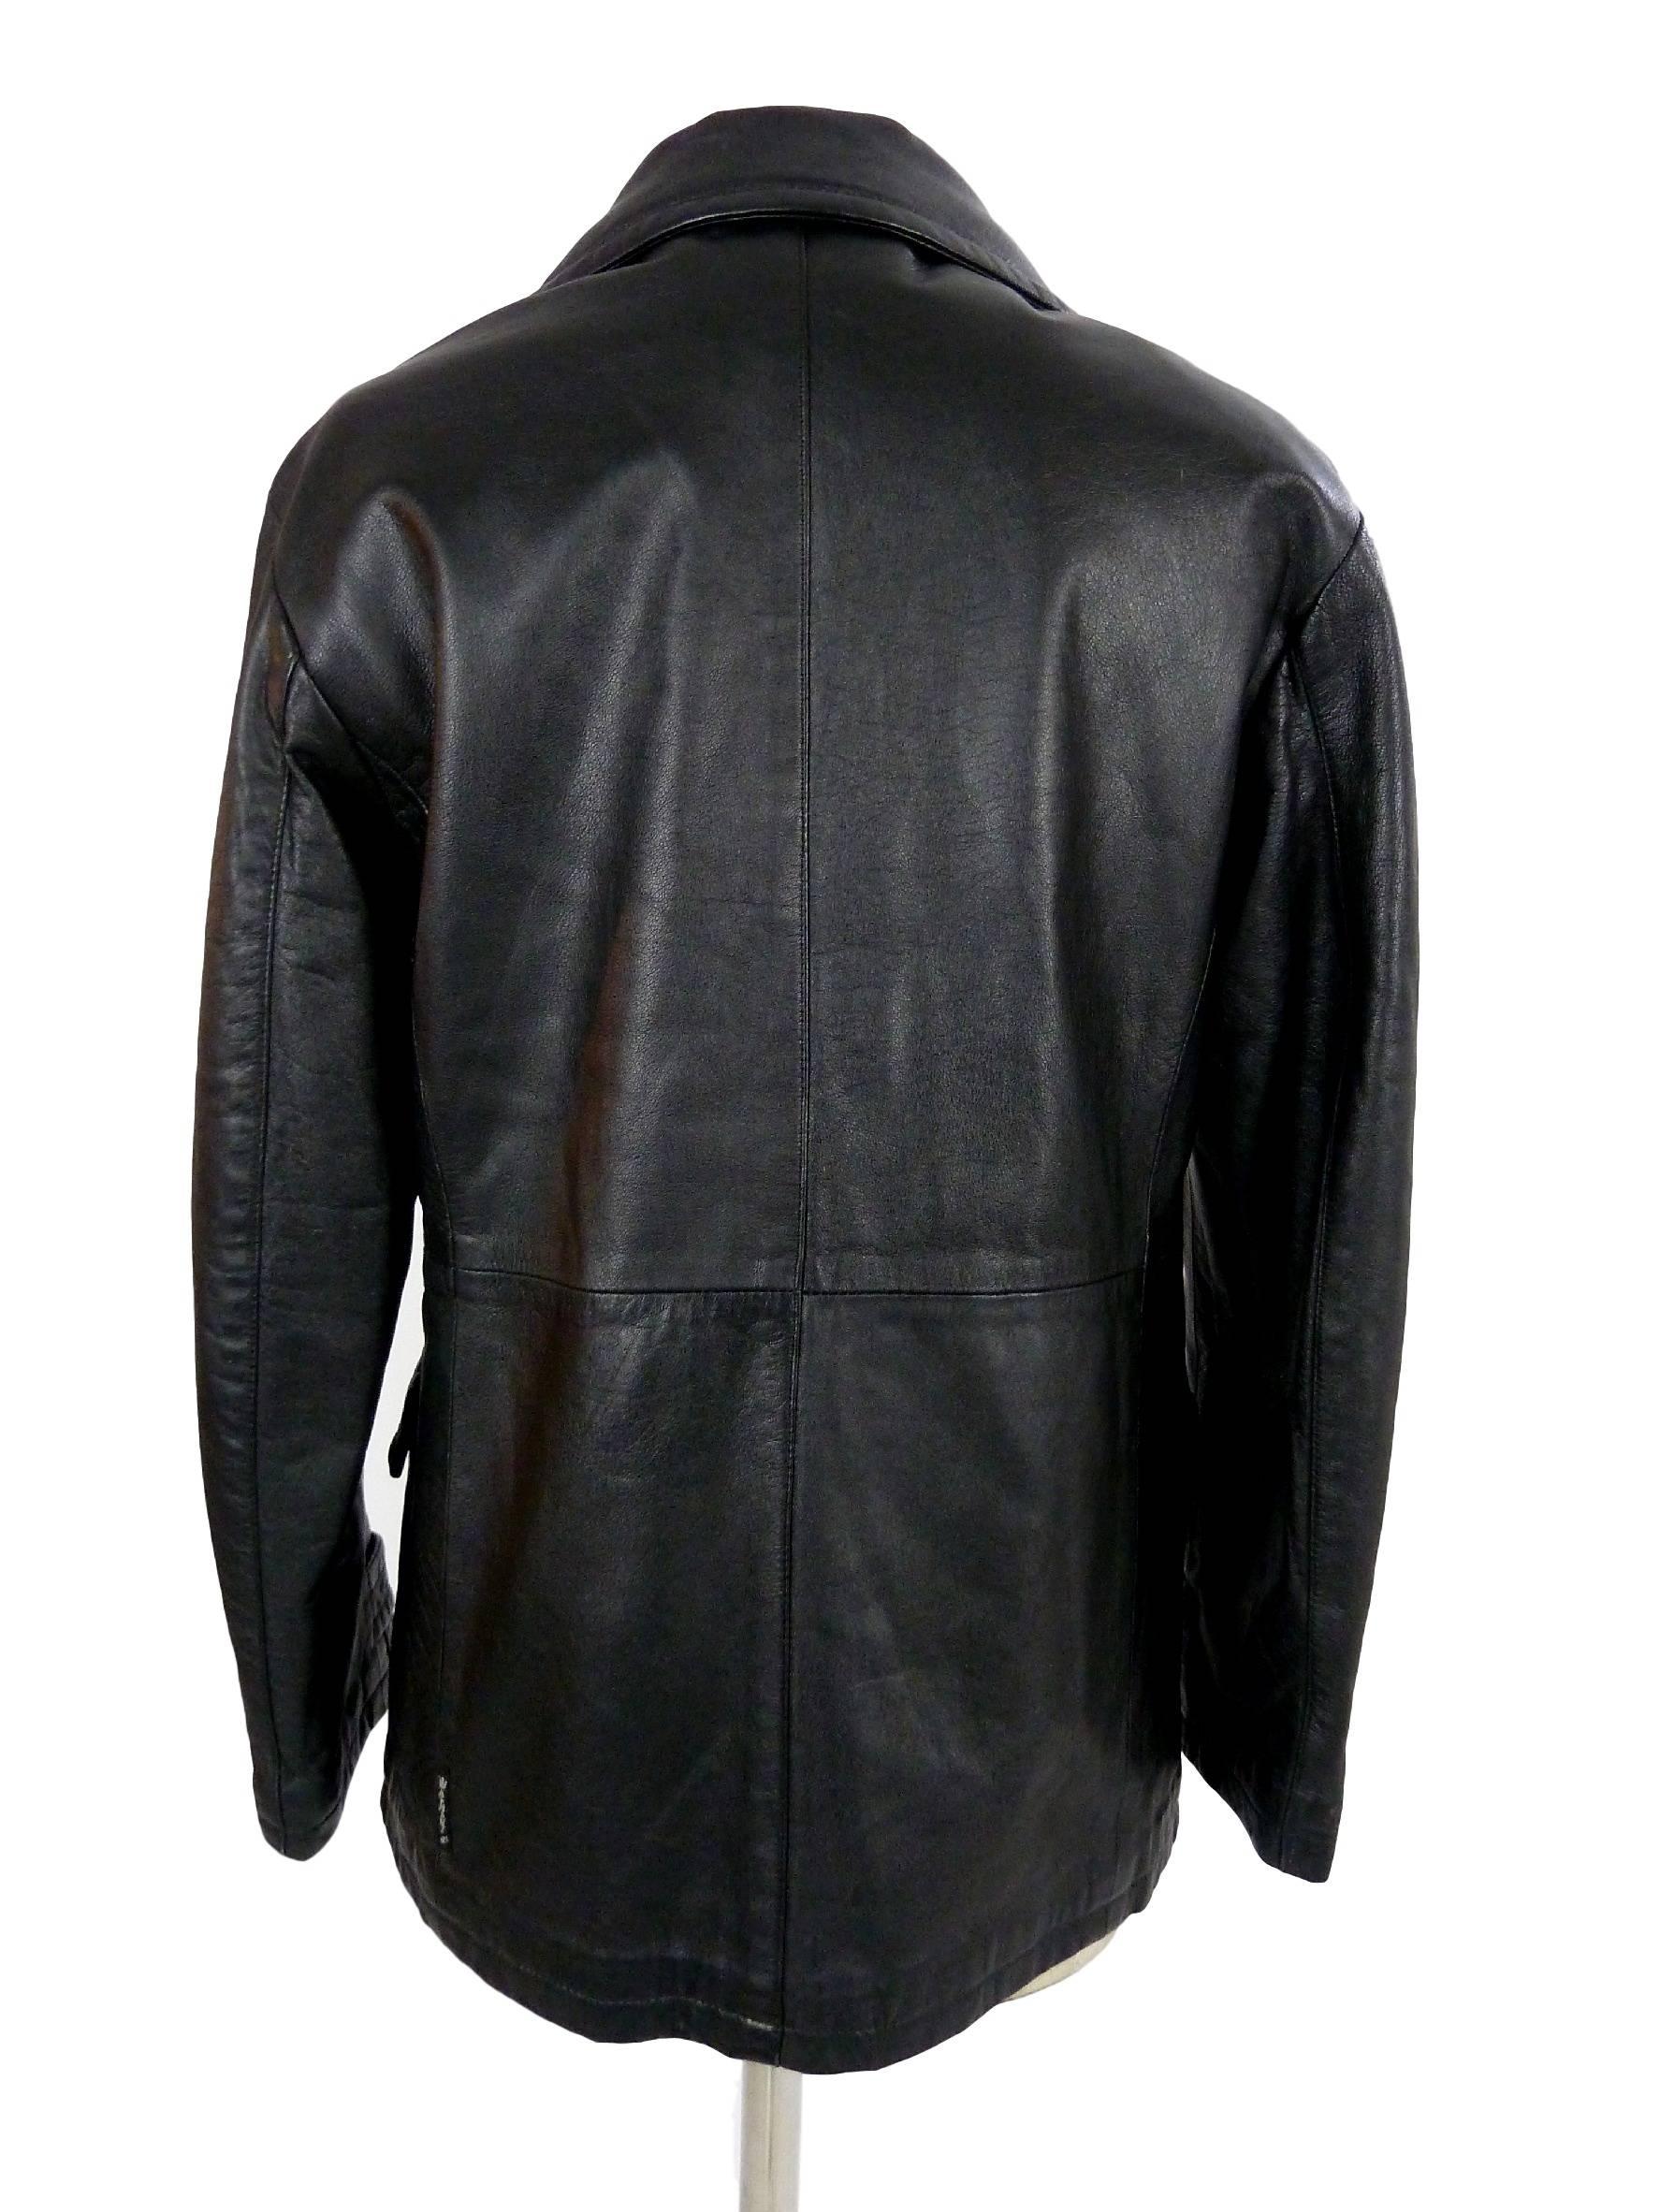 Giorgio Armani vintage 1990s 100% leather women's jacket, double breasted slim fit peacot.

Size: 40 IT 6 US 8 UK

Shoulders: 43 cm 
Bust/Chest: 50 cm 
Sleeves: 58 cm 
Length: 74 cm 

Composition: 100% genuine leather 
Colour: black 
Condition: